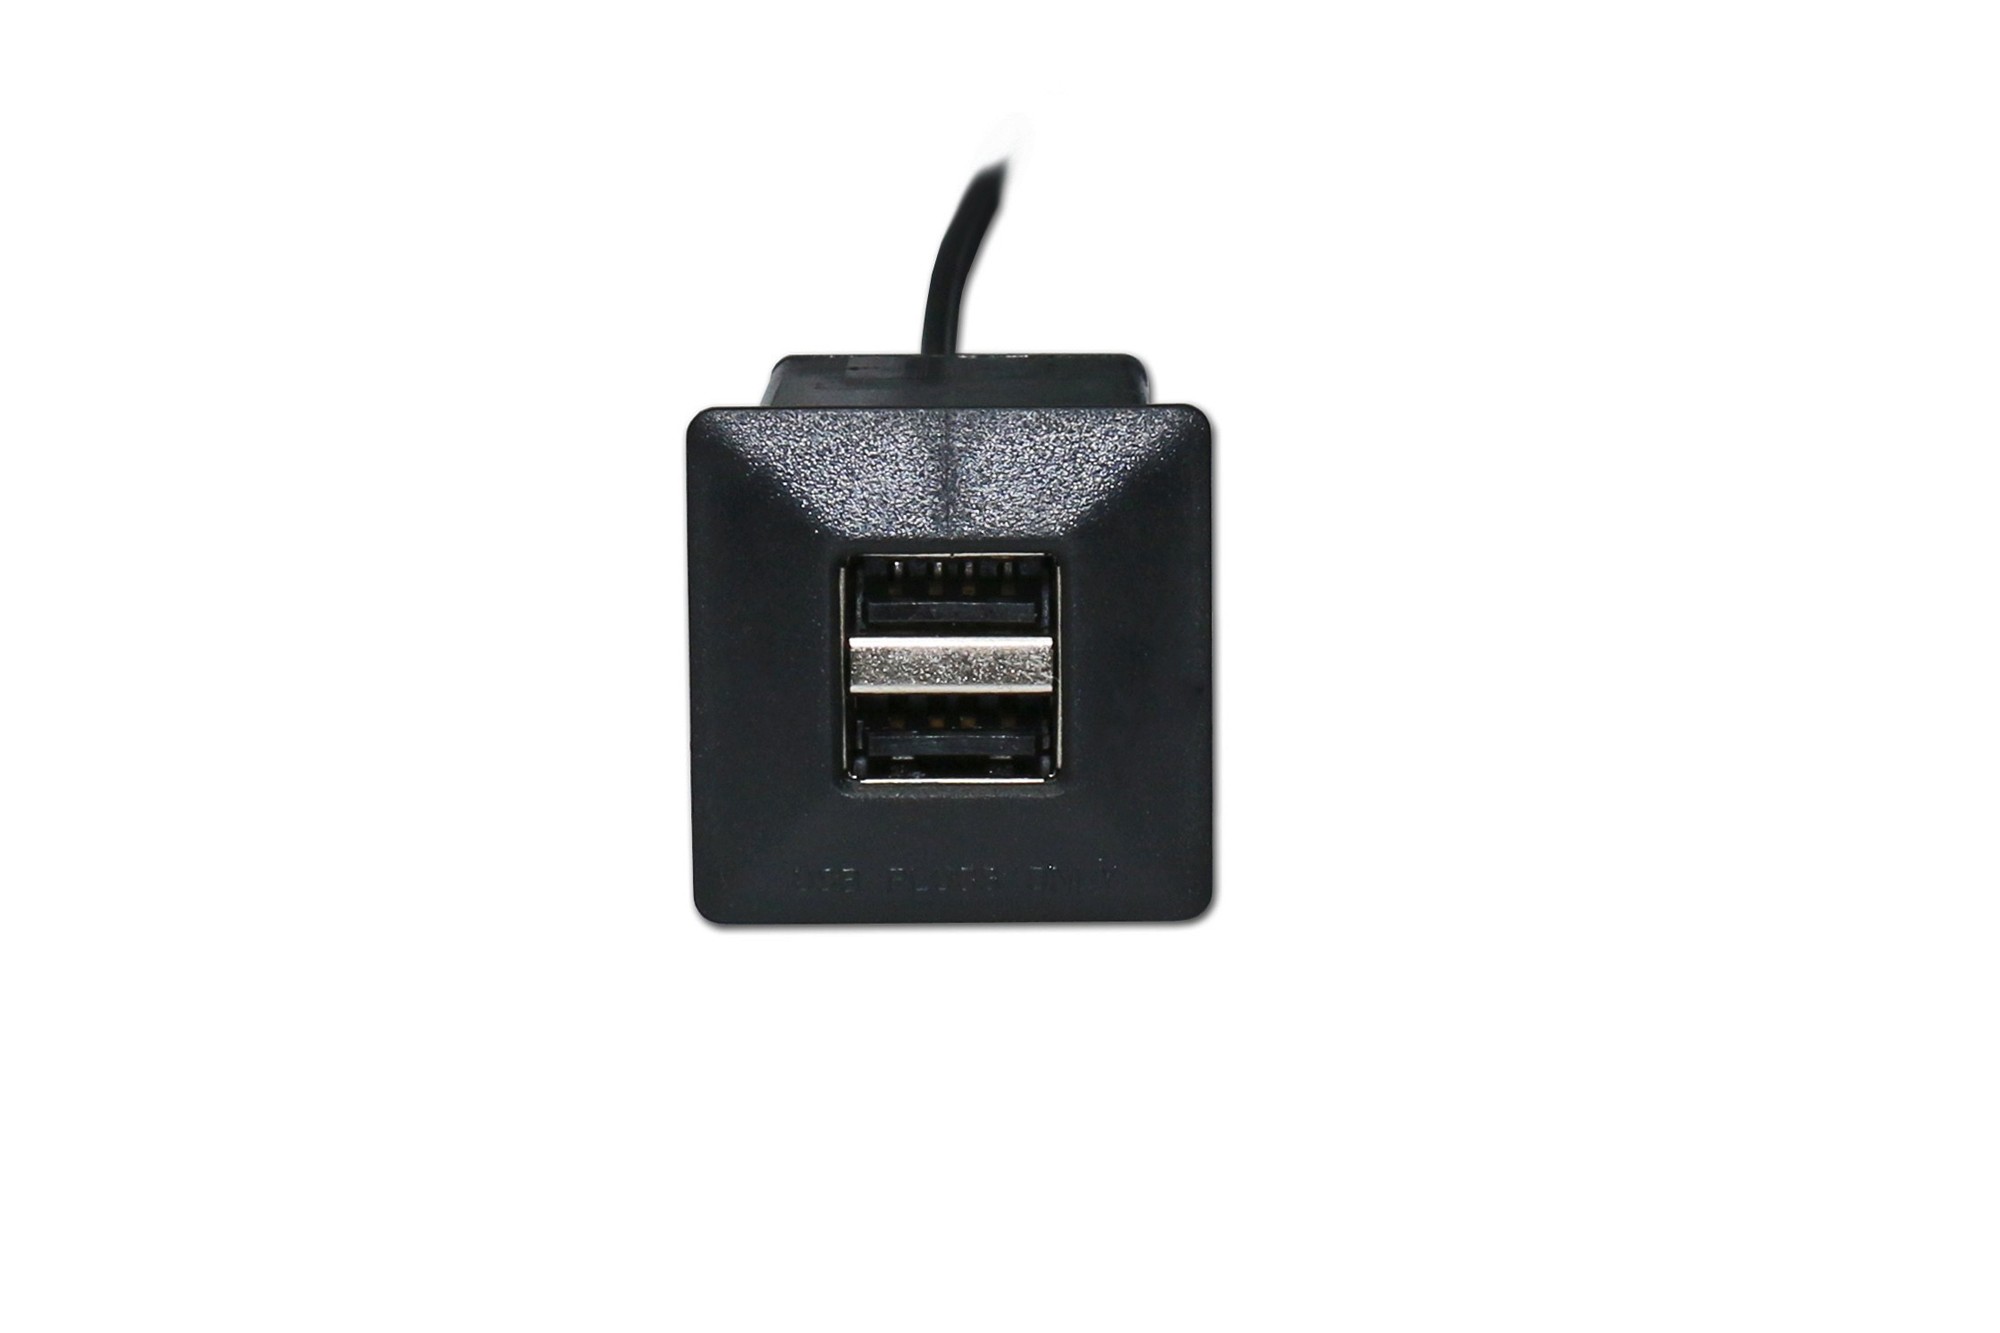 Dual USB charger, mini square with barrel connector